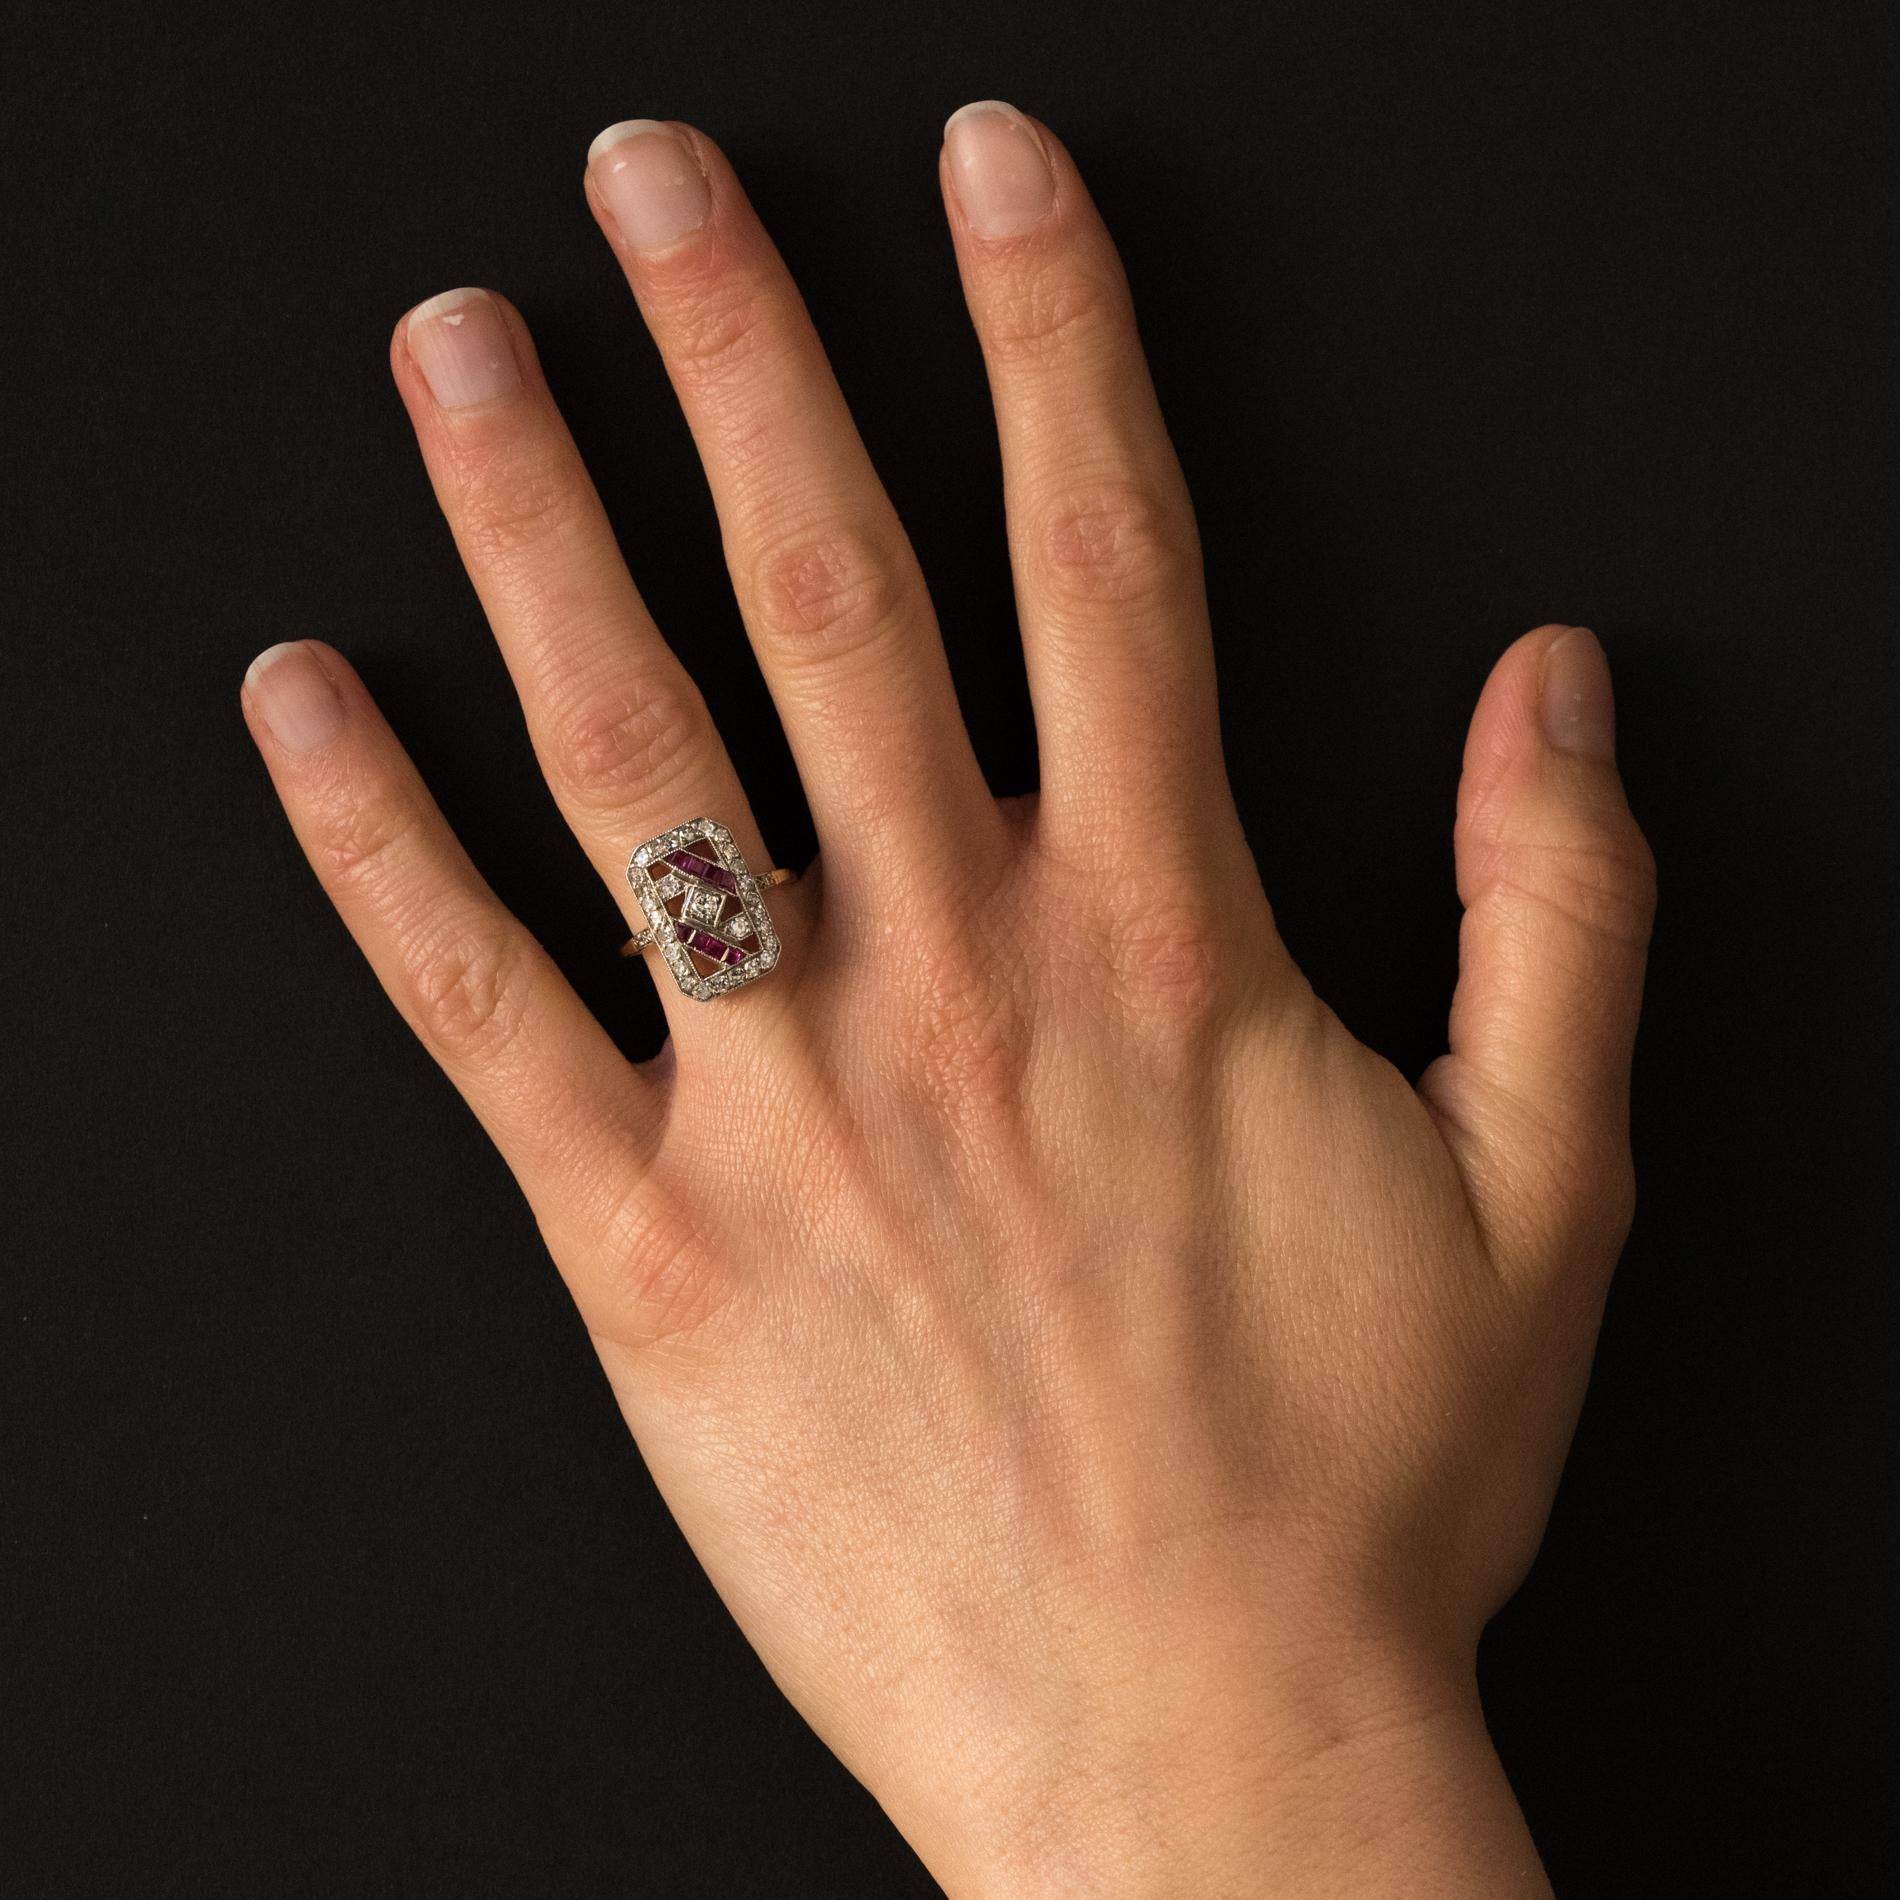 Ring in 18 karats yellow gold, owl hallmark and silver, swan hallmark.
Lovely antique ring of rectangular shape, it is set on a perforated tray and totally flat on the finger, of calibrated diamonds and synthetic ruby. On both sides of the head, on